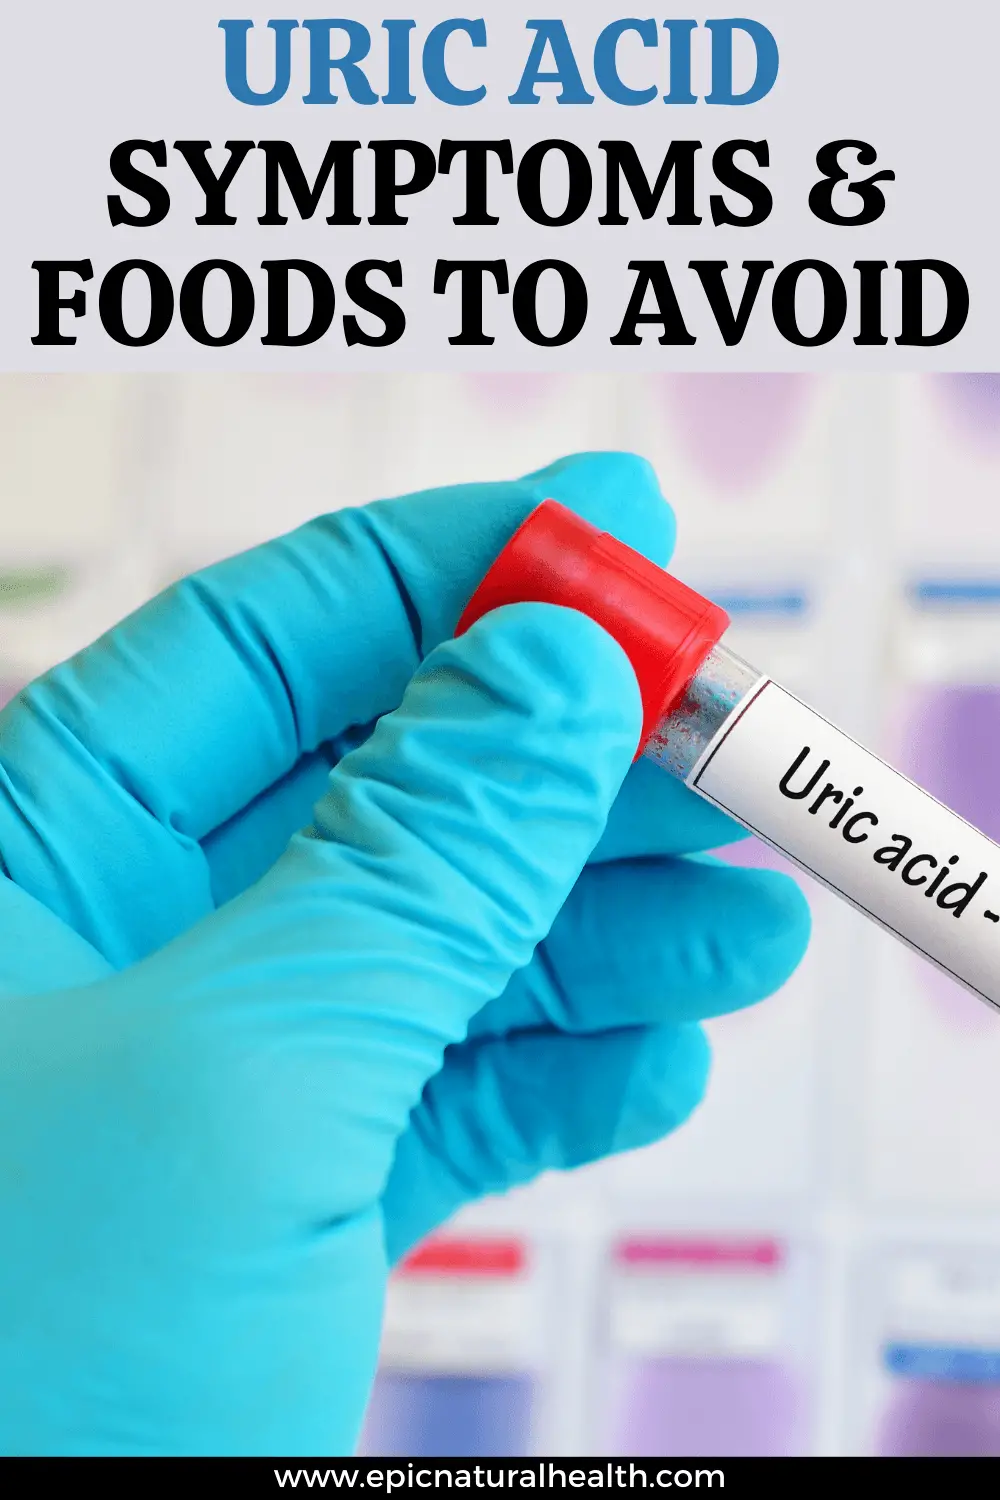 Uric acid symptons and foods to avoid